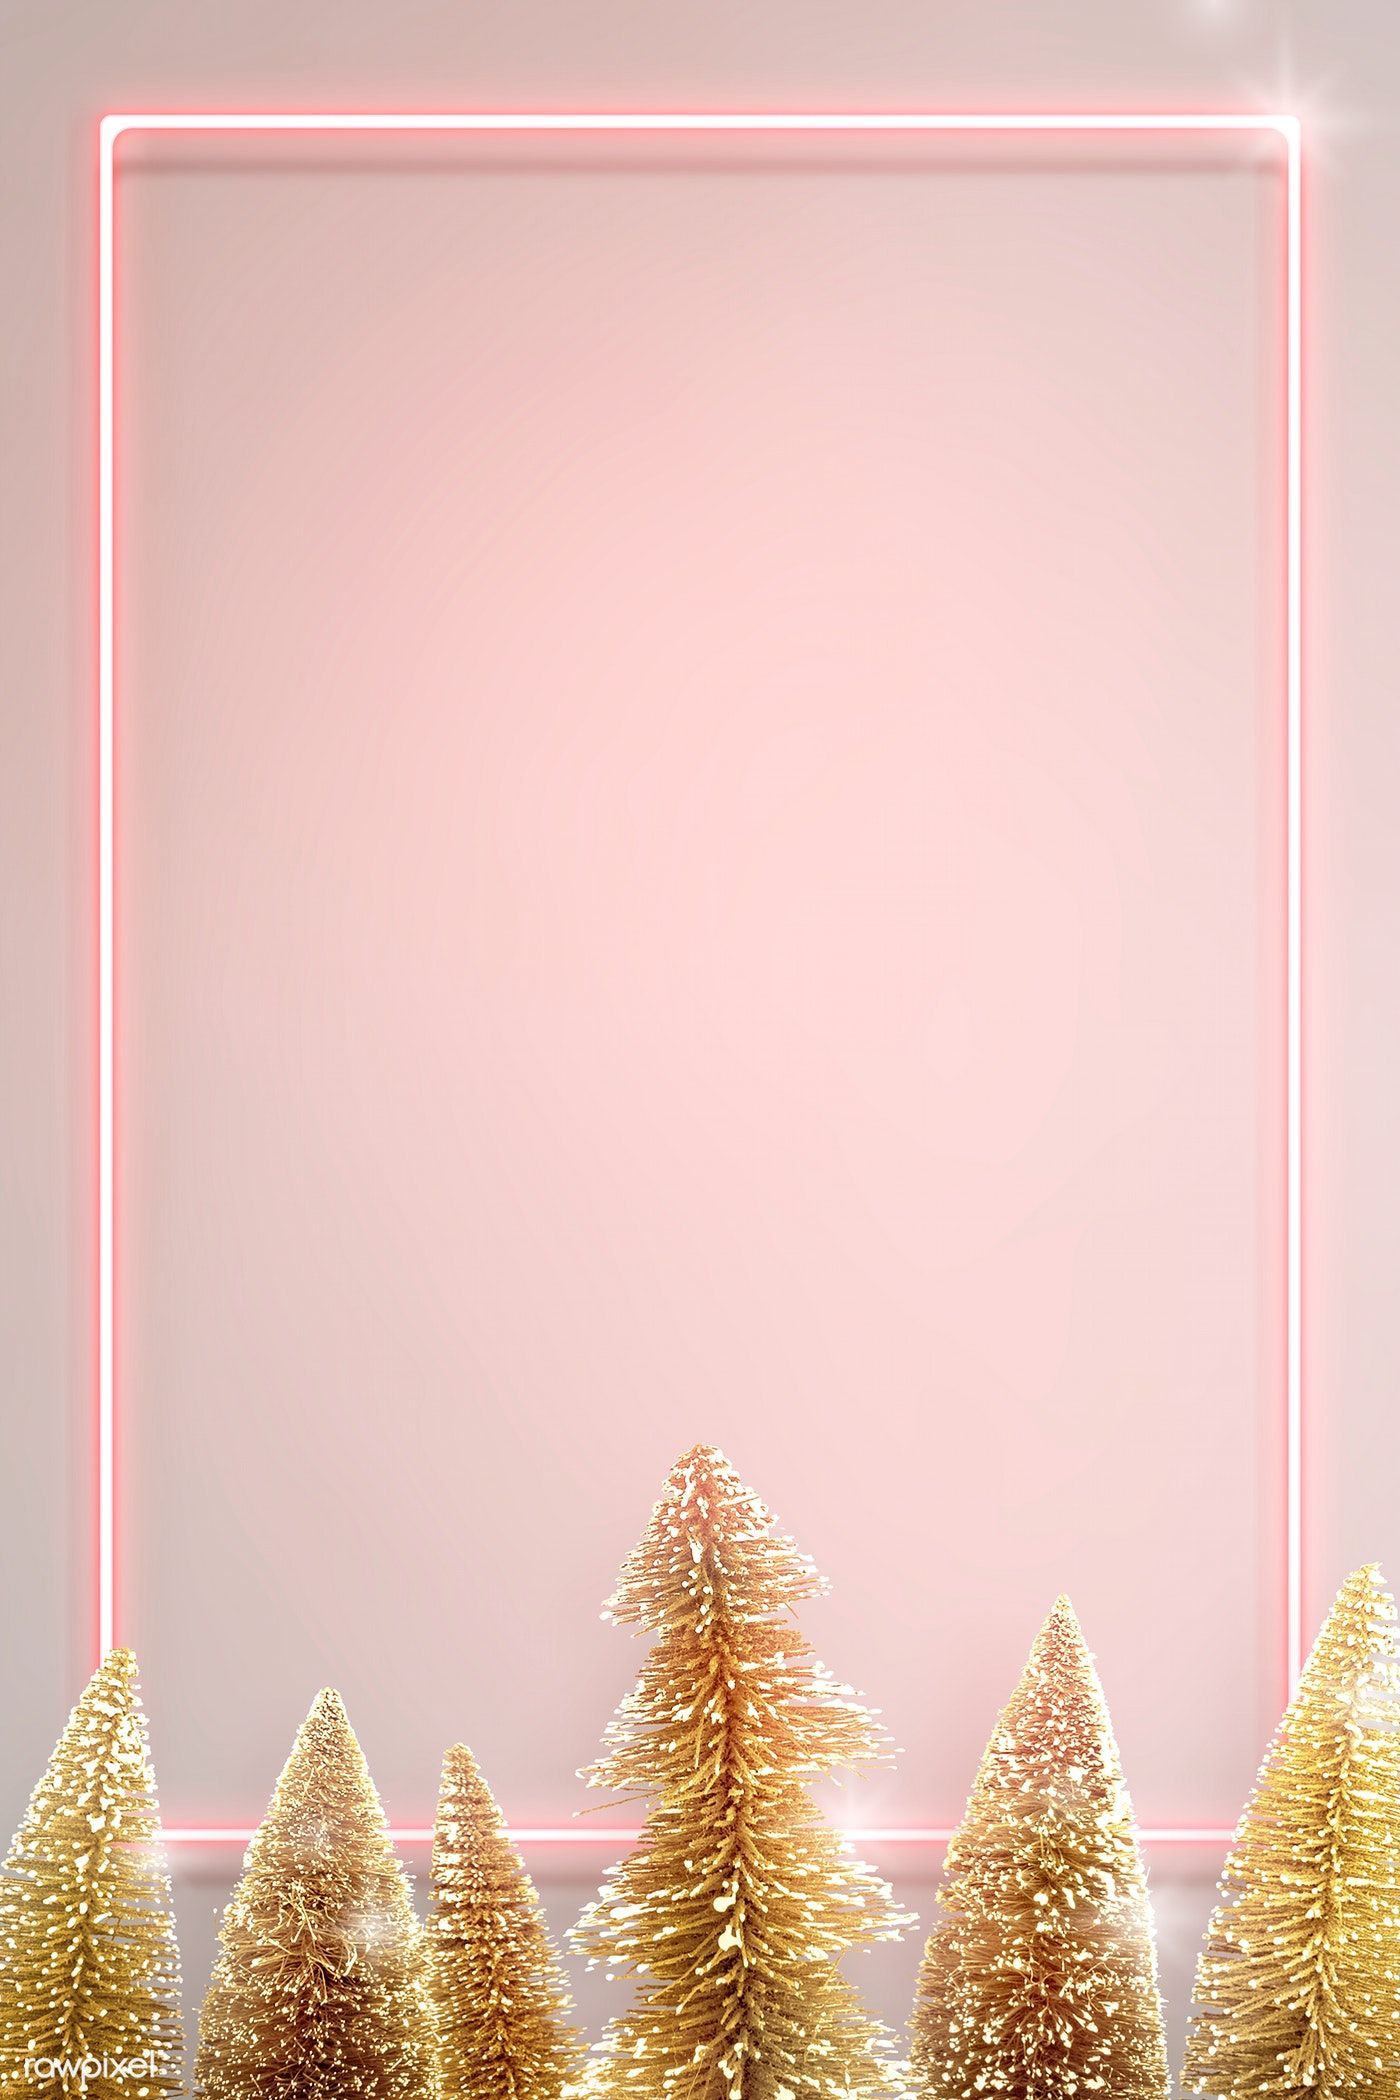 Download premium psd of Pink neon frame with gold Christmas trees. Christmas tree background, Pink christmas background, Christmas tree wallpaper